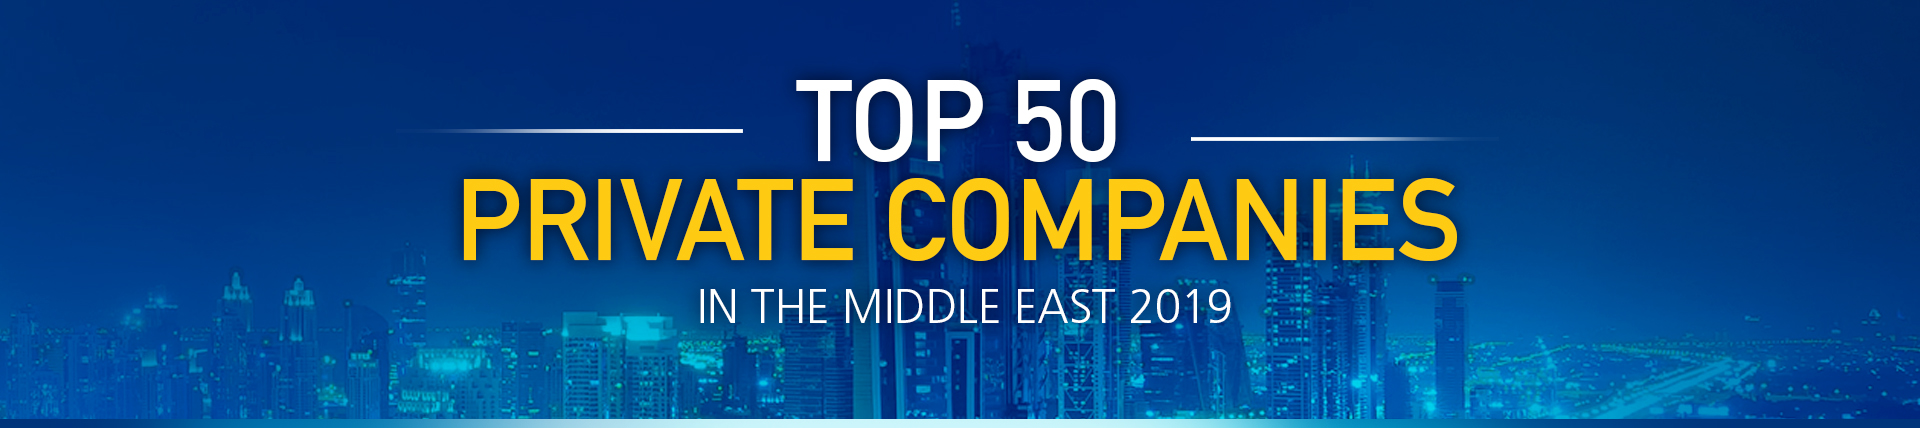 Top 50 Private Companies In The Middle East 2019